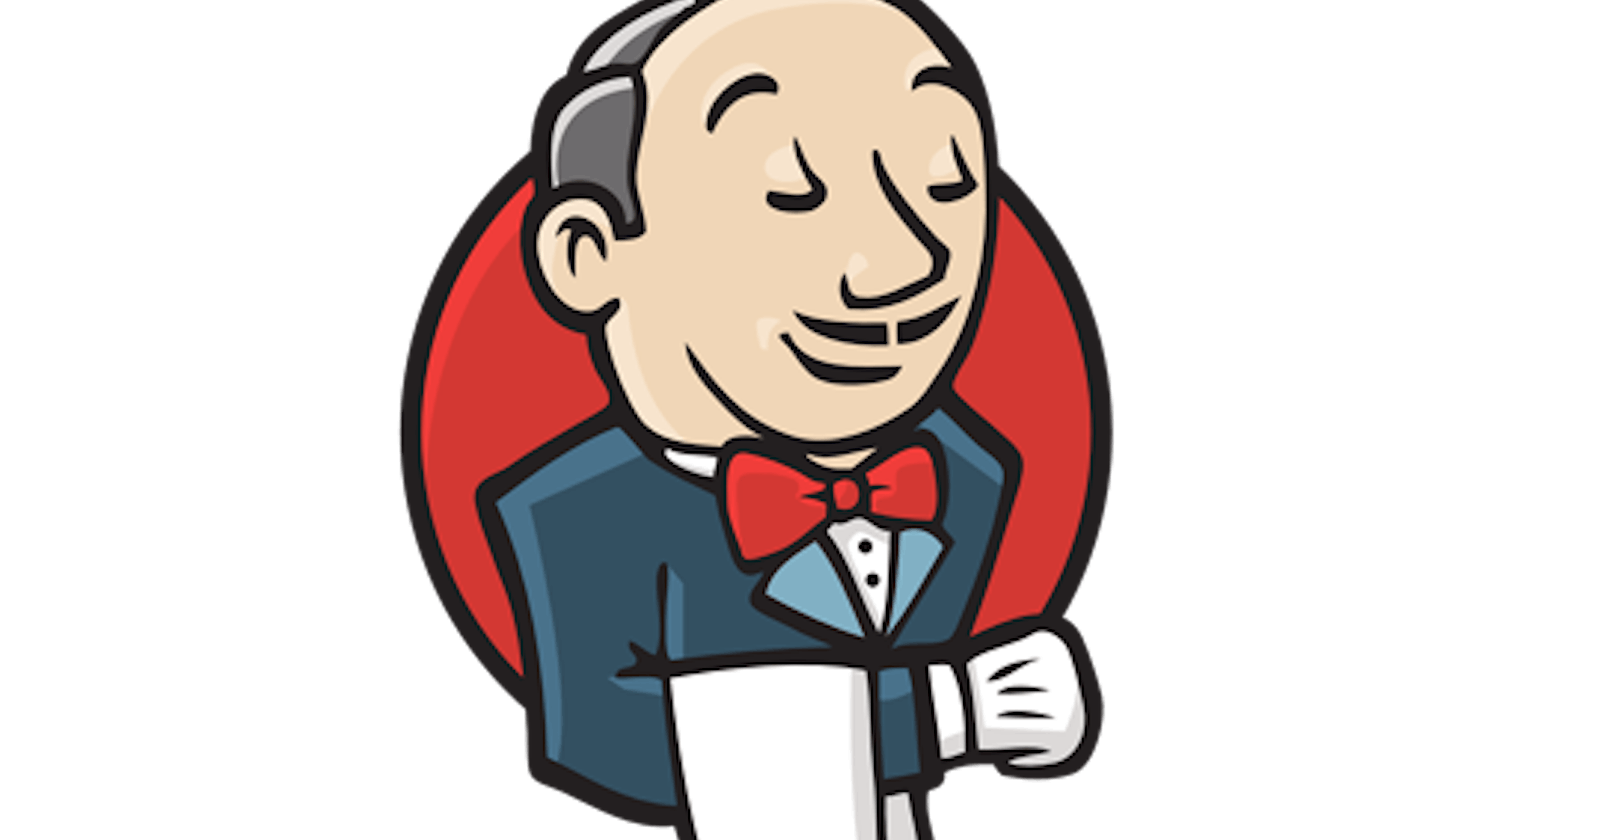 What is Jenkins?